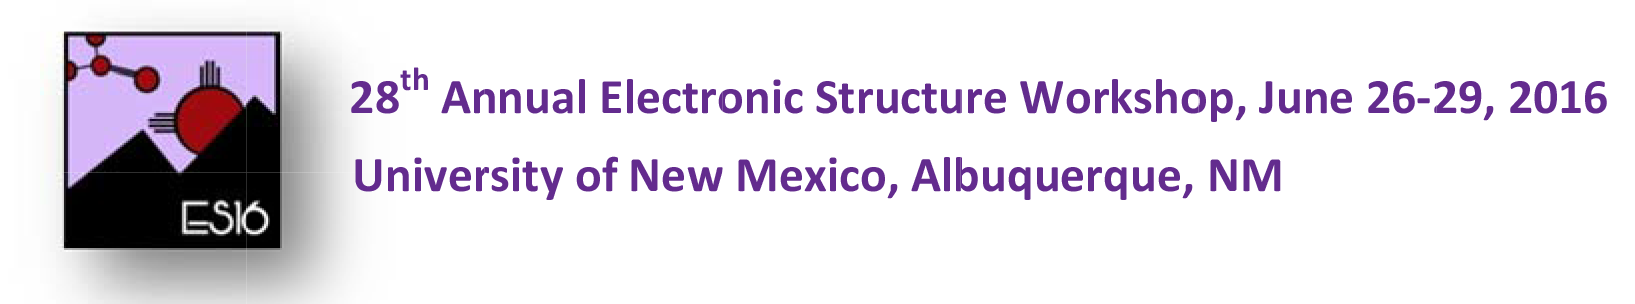 ES2016 28th Annual Electronic Structure Workshop -- June
       26-29, 2016